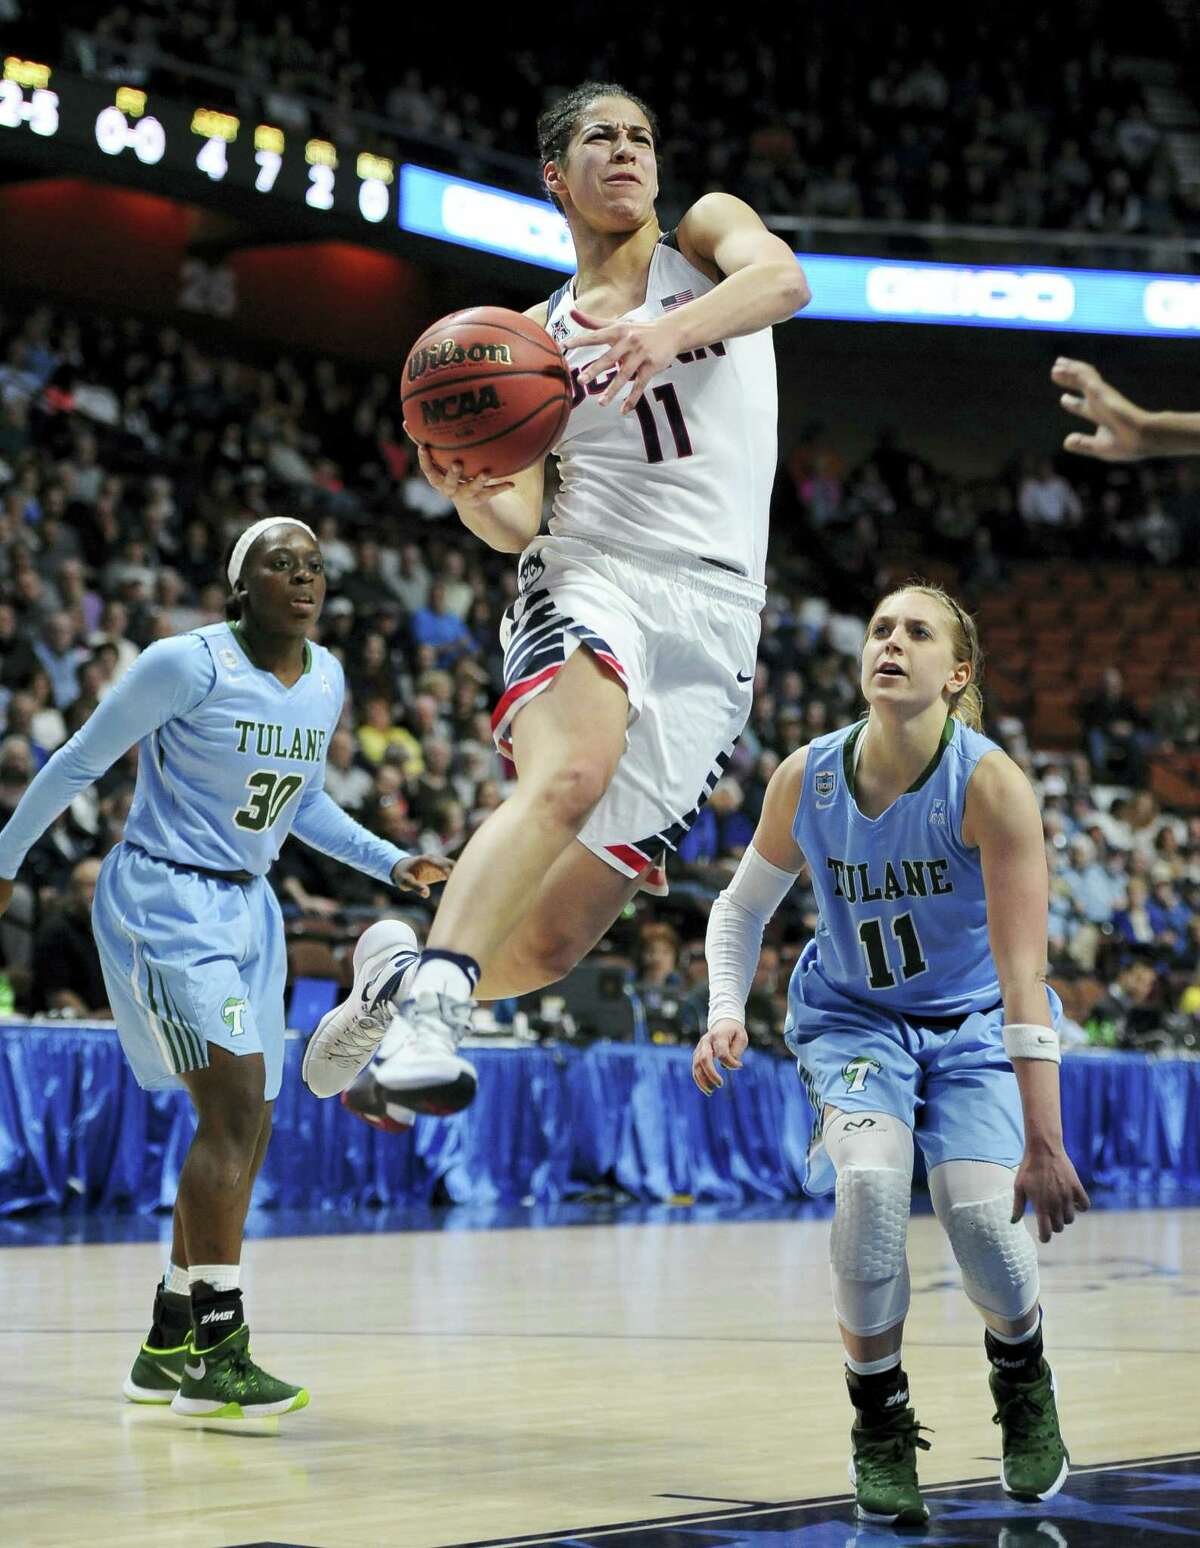 Connecticut’s Kia Nurse, center, drives to the basket as Tulane’s Tierra Jones, left, and Tulane’s Leslie Vorpahl, right, defend, during the first half of an NCAA college basketball game in the American Athletic Conference tournament semifinals at Mohegan Sun Arena, Sunday, March 6, 2016, in Uncasville, Conn. (AP Photo/Jessica Hill)